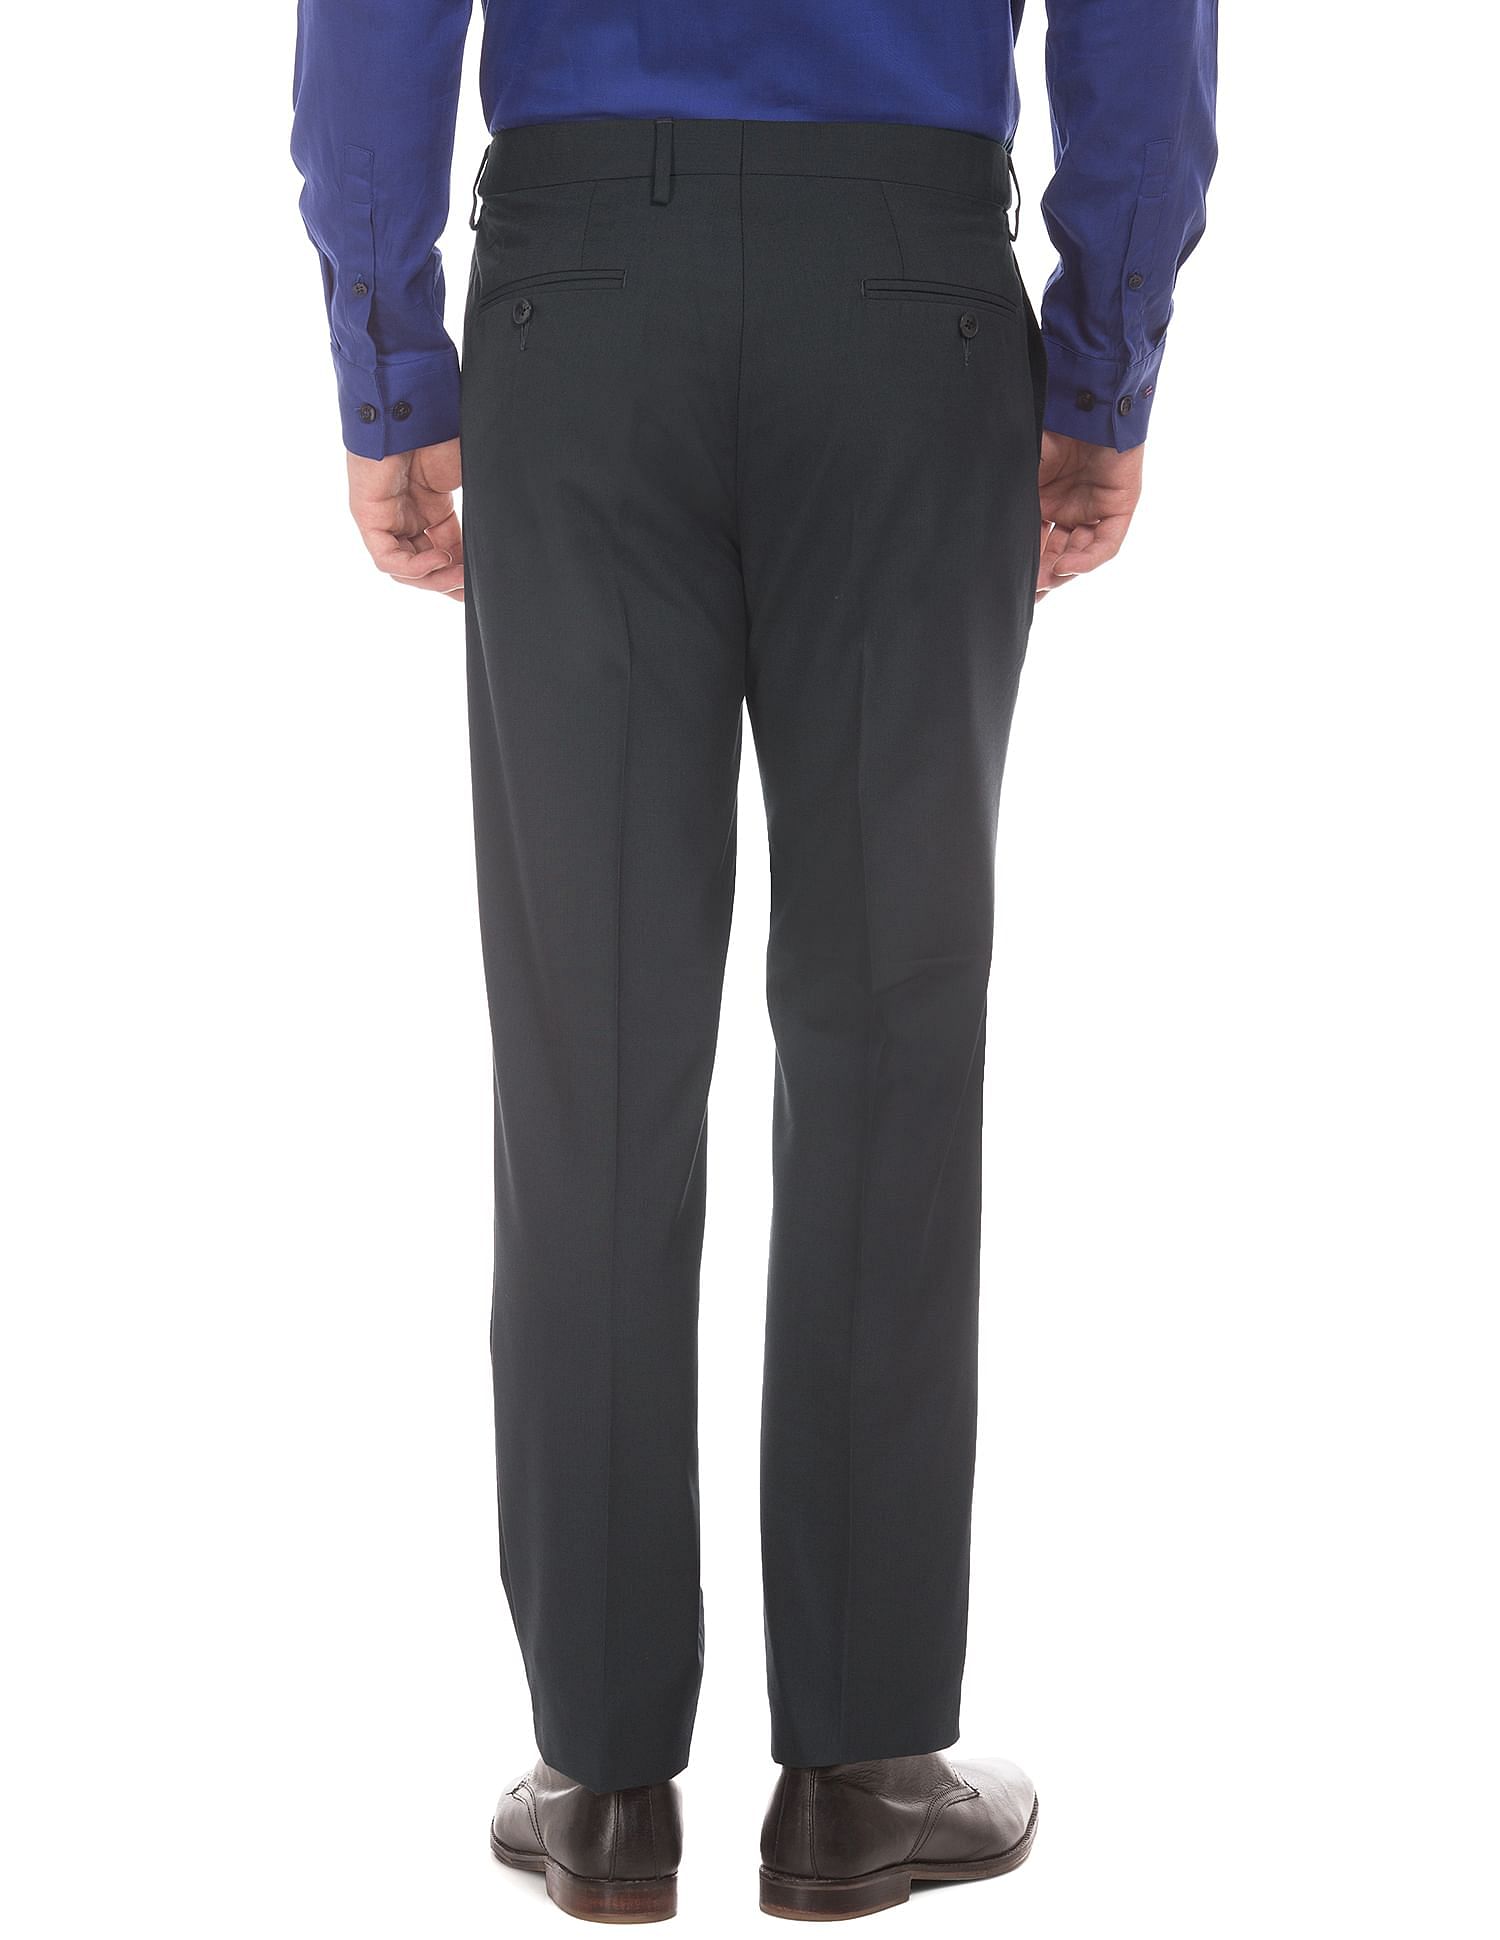 Buy Pink Trousers & Pants for Men by Arrow Sports Online | Ajio.com